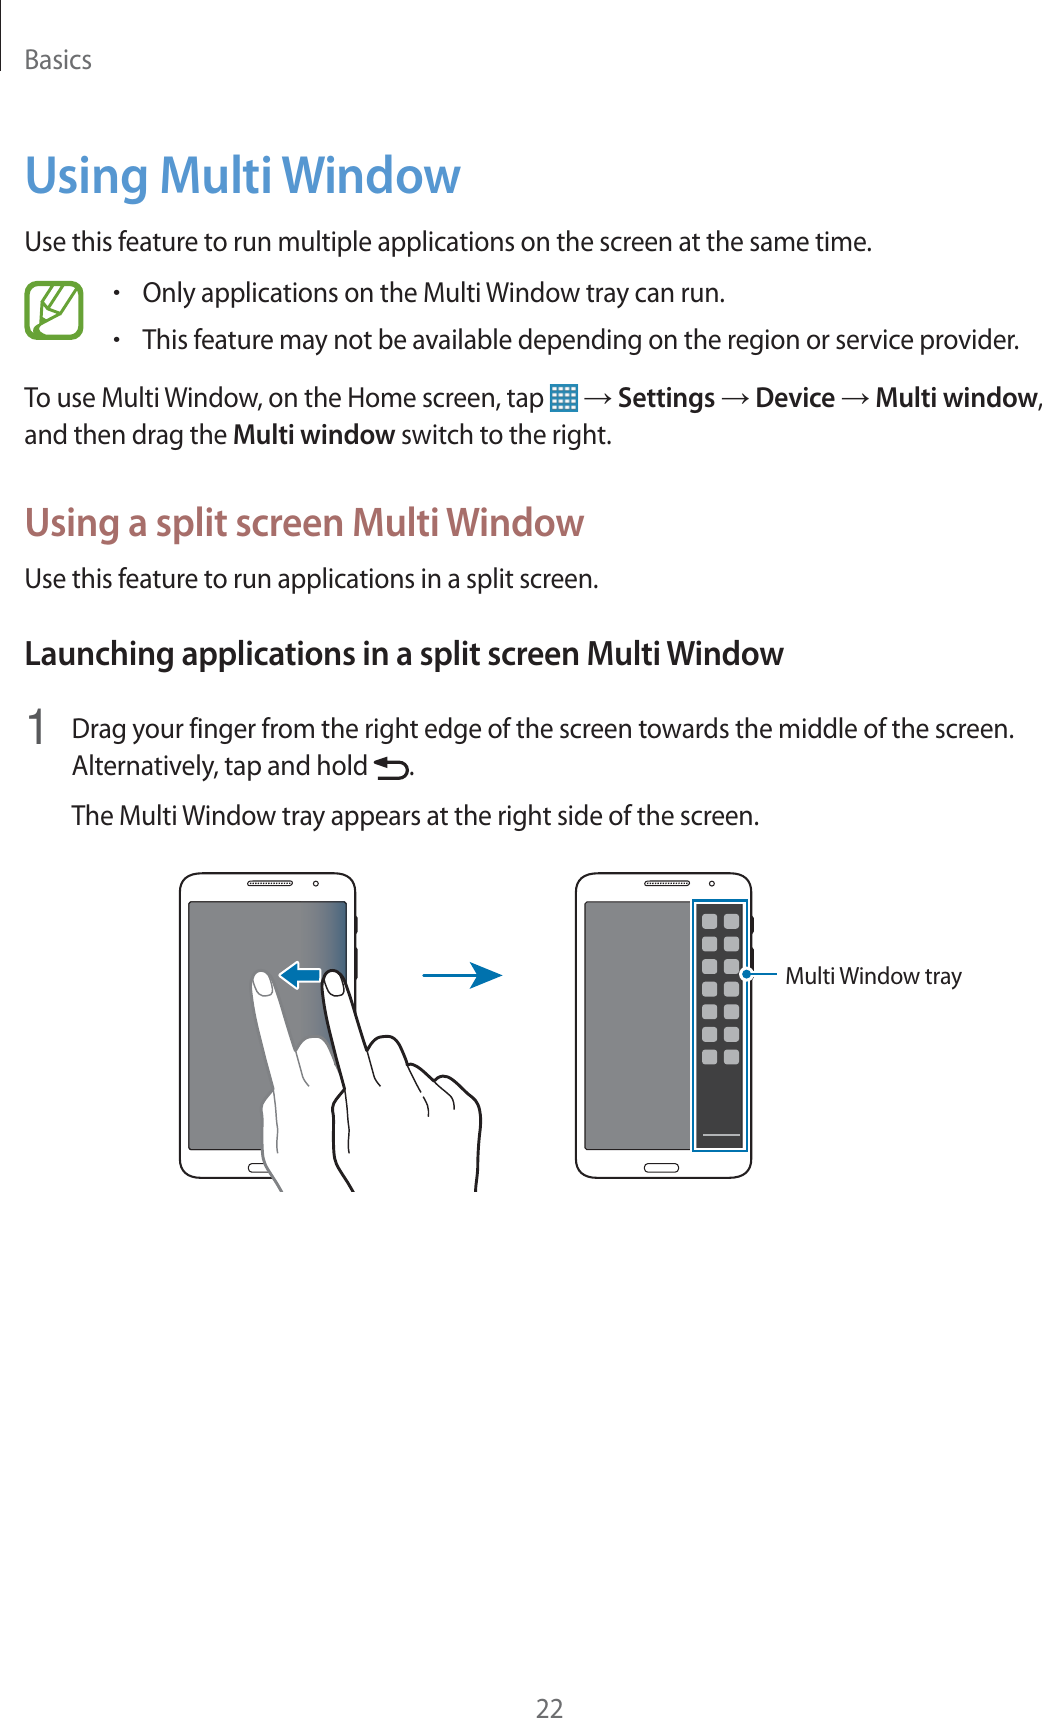 Basics22Using Multi WindowUse this feature to run multiple applications on the screen at the same time.rOnly applications on the Multi Window tray can run.rThis feature may not be available depending on the region or service provider.To use Multi Window, on the Home screen, tap   ĺ Settings ĺ Device ĺ Multi window, and then drag the Multi window switch to the right.Using a split screen Multi WindowUse this feature to run applications in a split screen.Launching applications in a split screen Multi Window1  Drag your finger from the right edge of the screen towards the middle of the screen.Alternatively, tap and hold  .The Multi Window tray appears at the right side of the screen.Multi Window tray